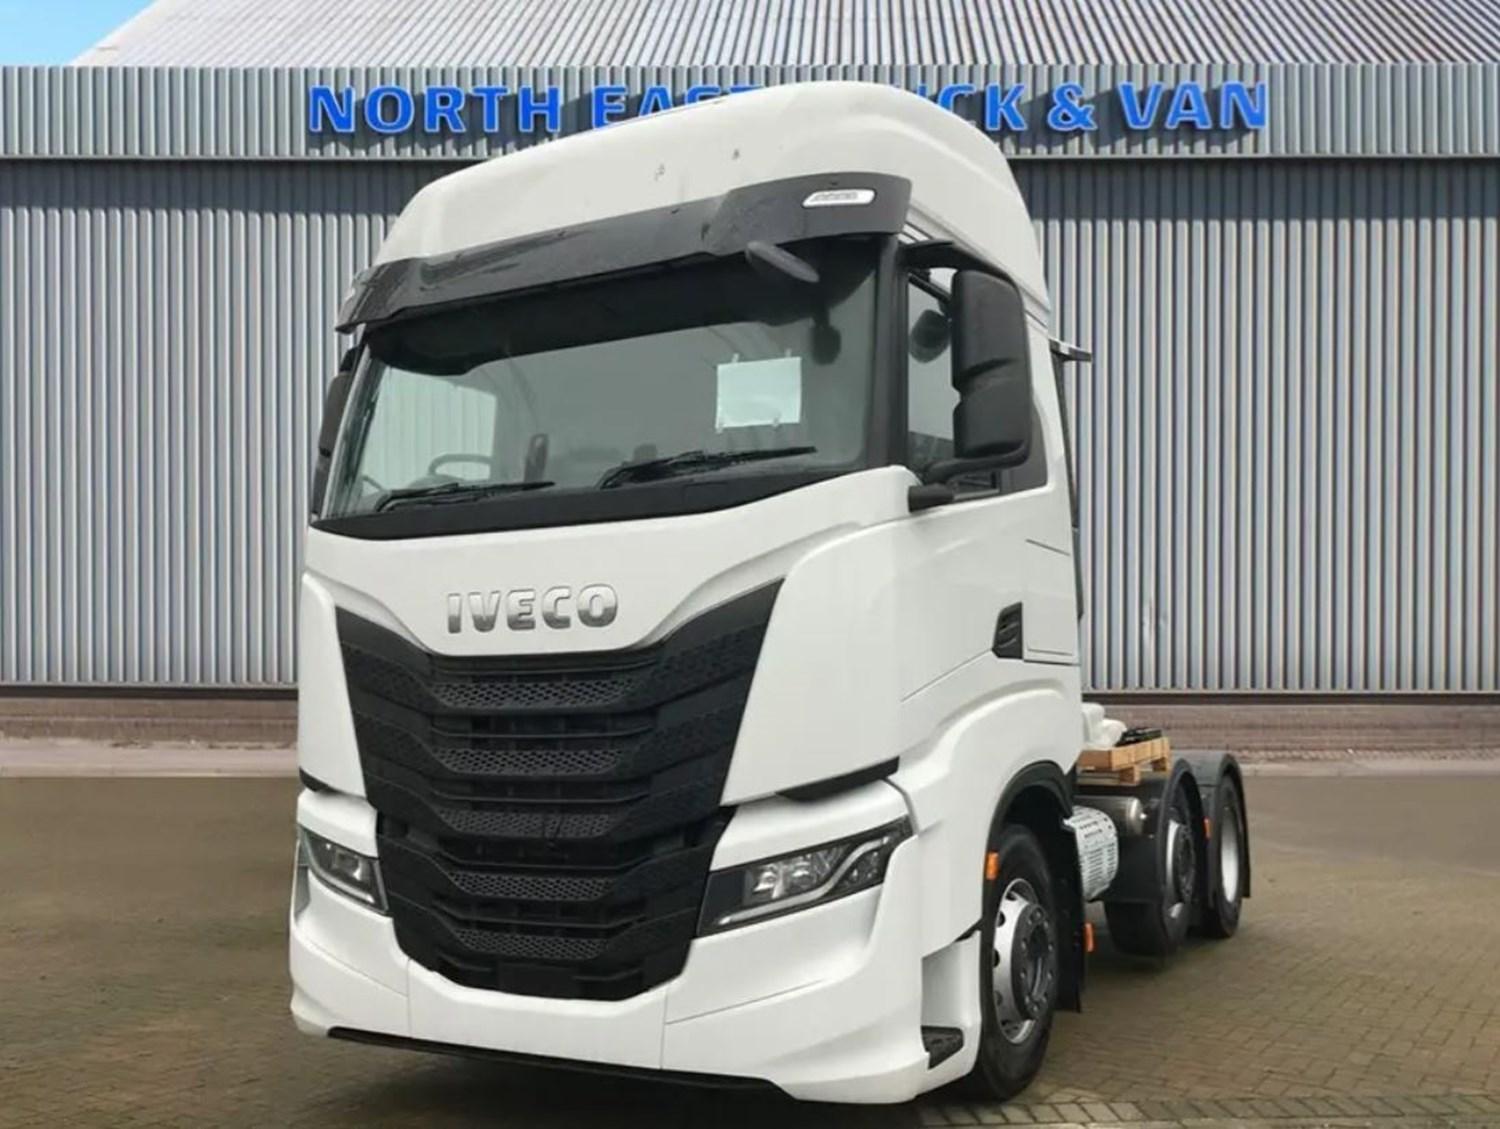 IVECO S-WAY in stock